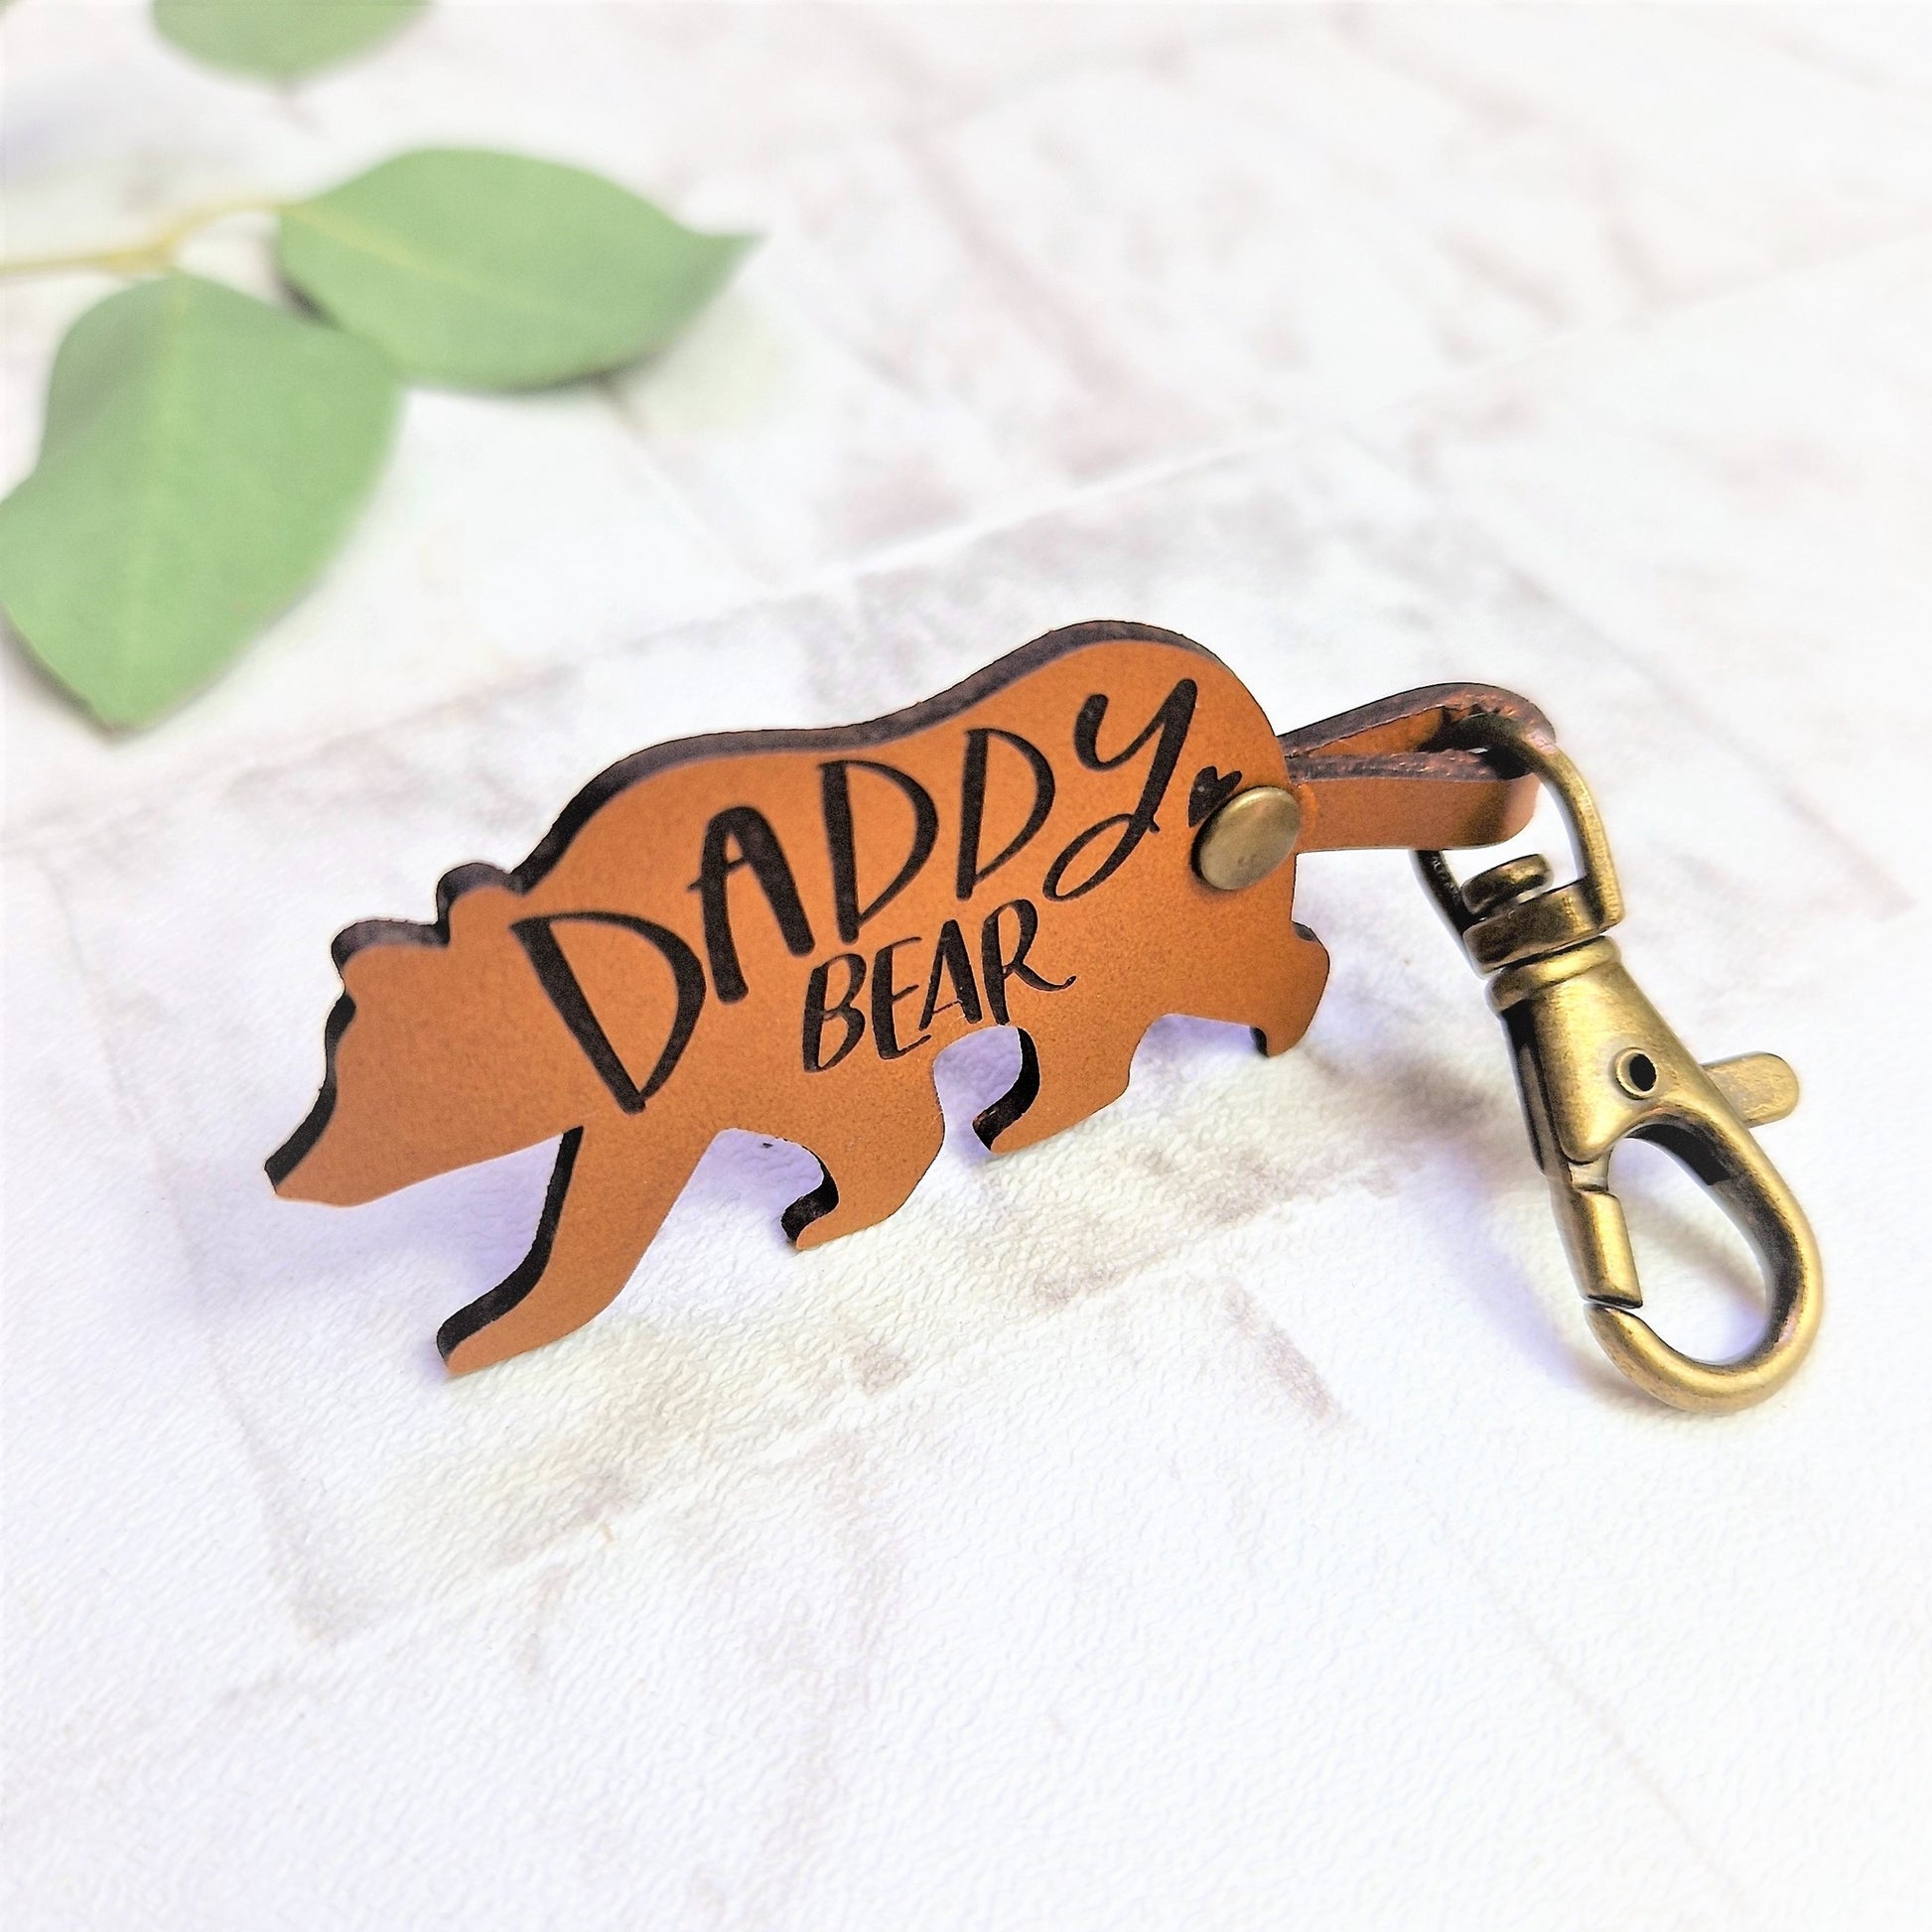 fathers day gift idea daddy bear leather keyring 